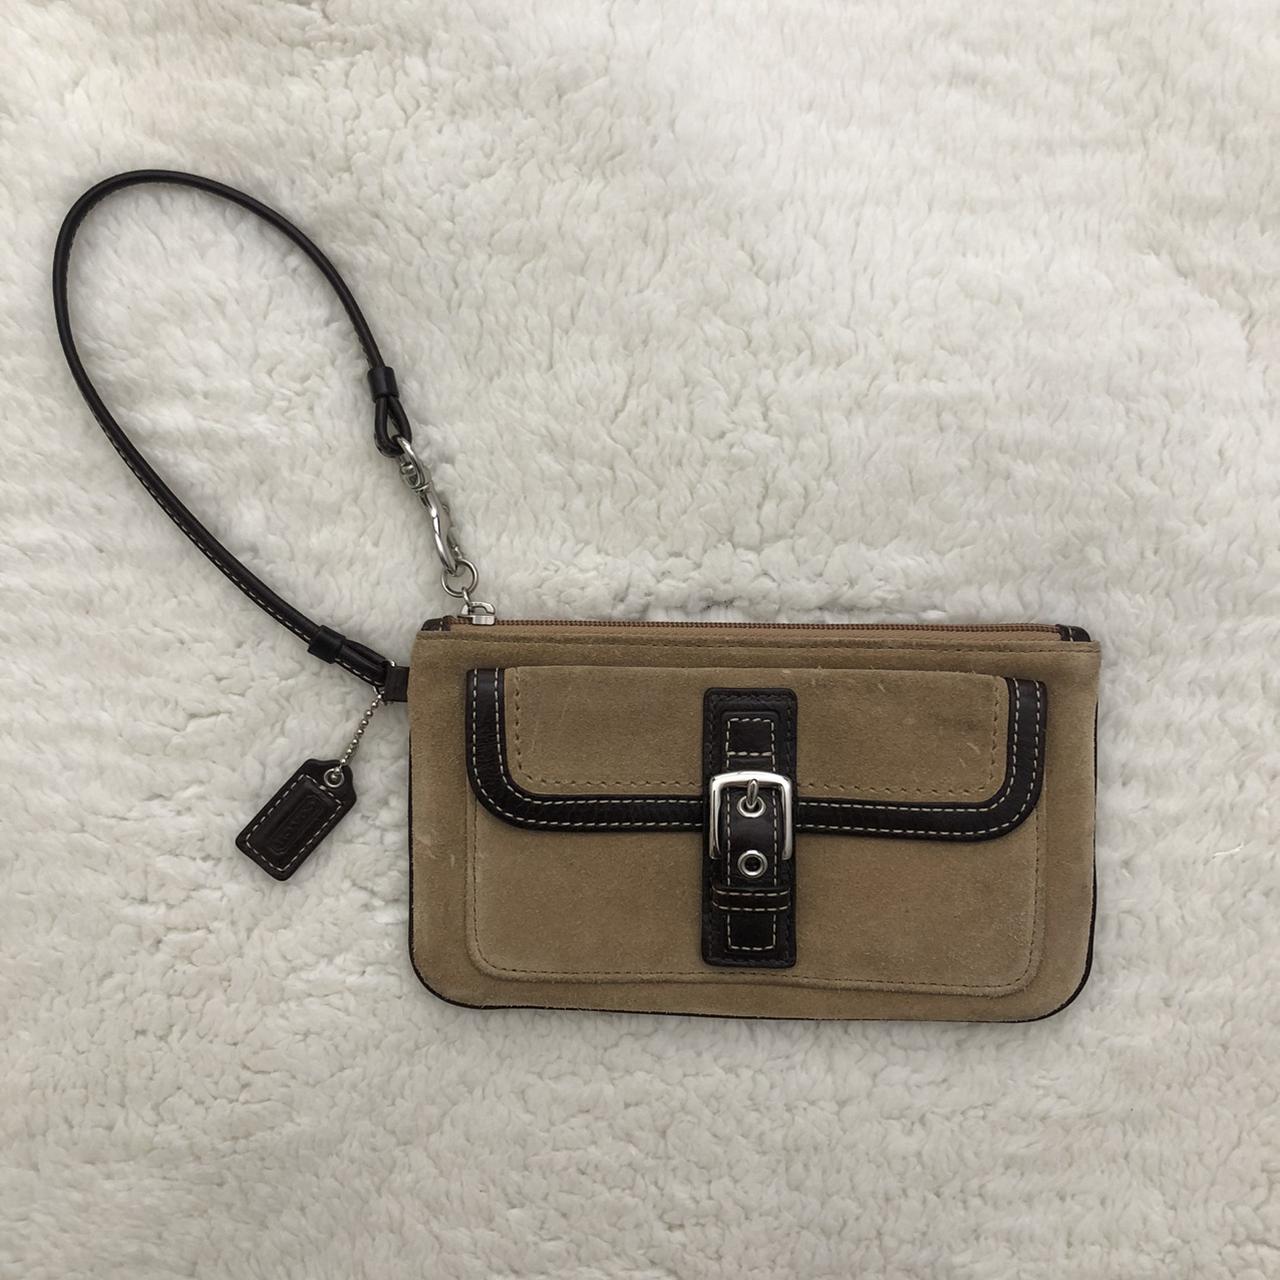 Vintage brown coach bag 🤎 this purse is so cute and